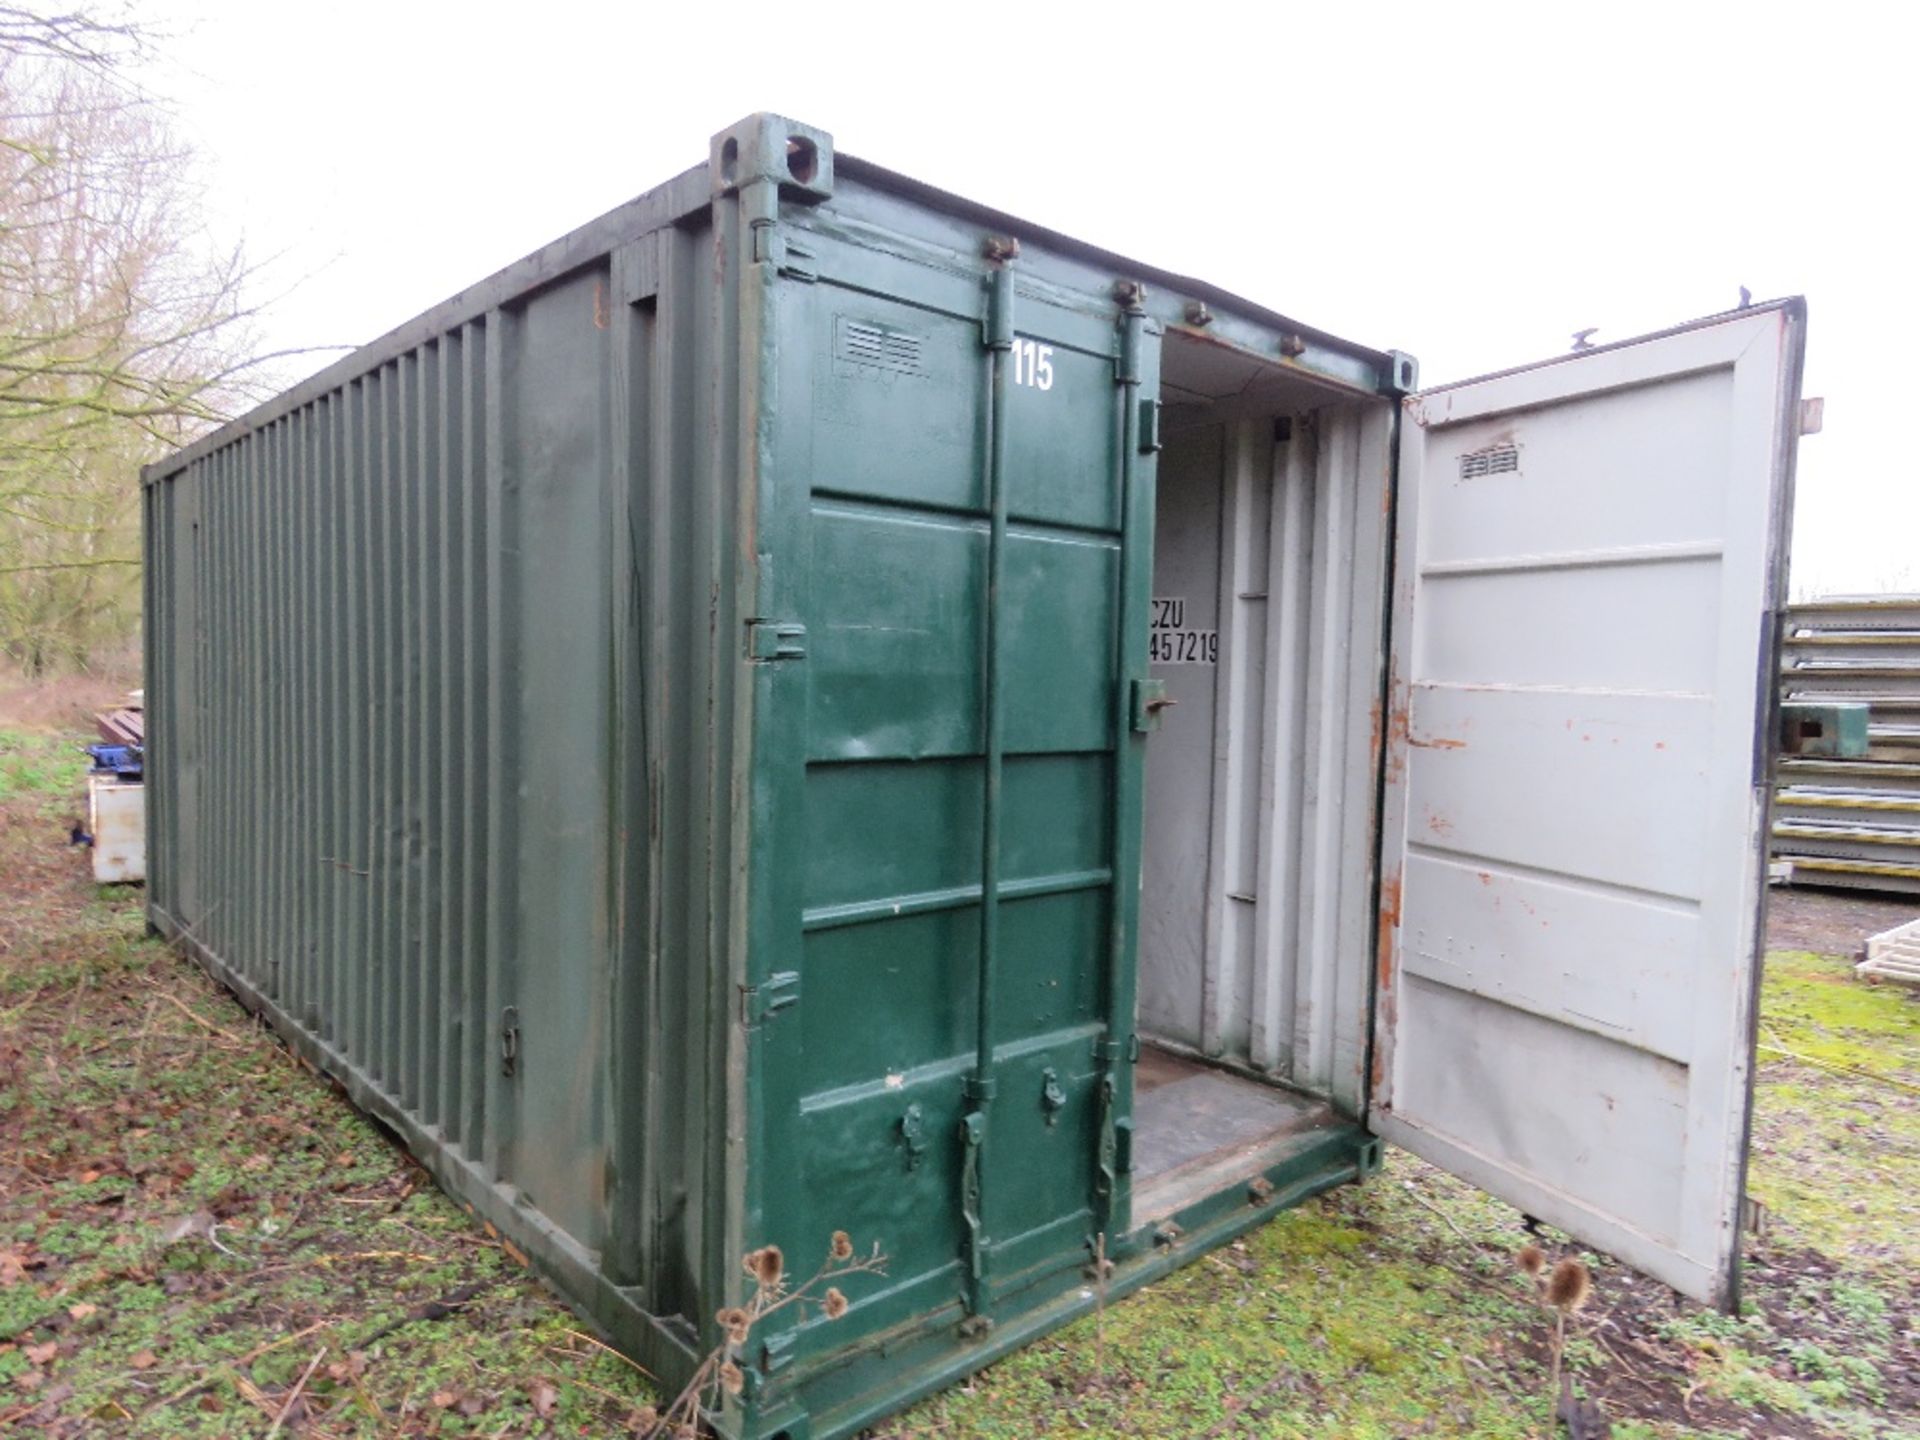 SECURE SHIPPING CONTAINER TYPE SITE STORE, 20FT LENGTH. FROM VISUAL INSPECTION APPEARED DRY INSIDE. - Image 2 of 5